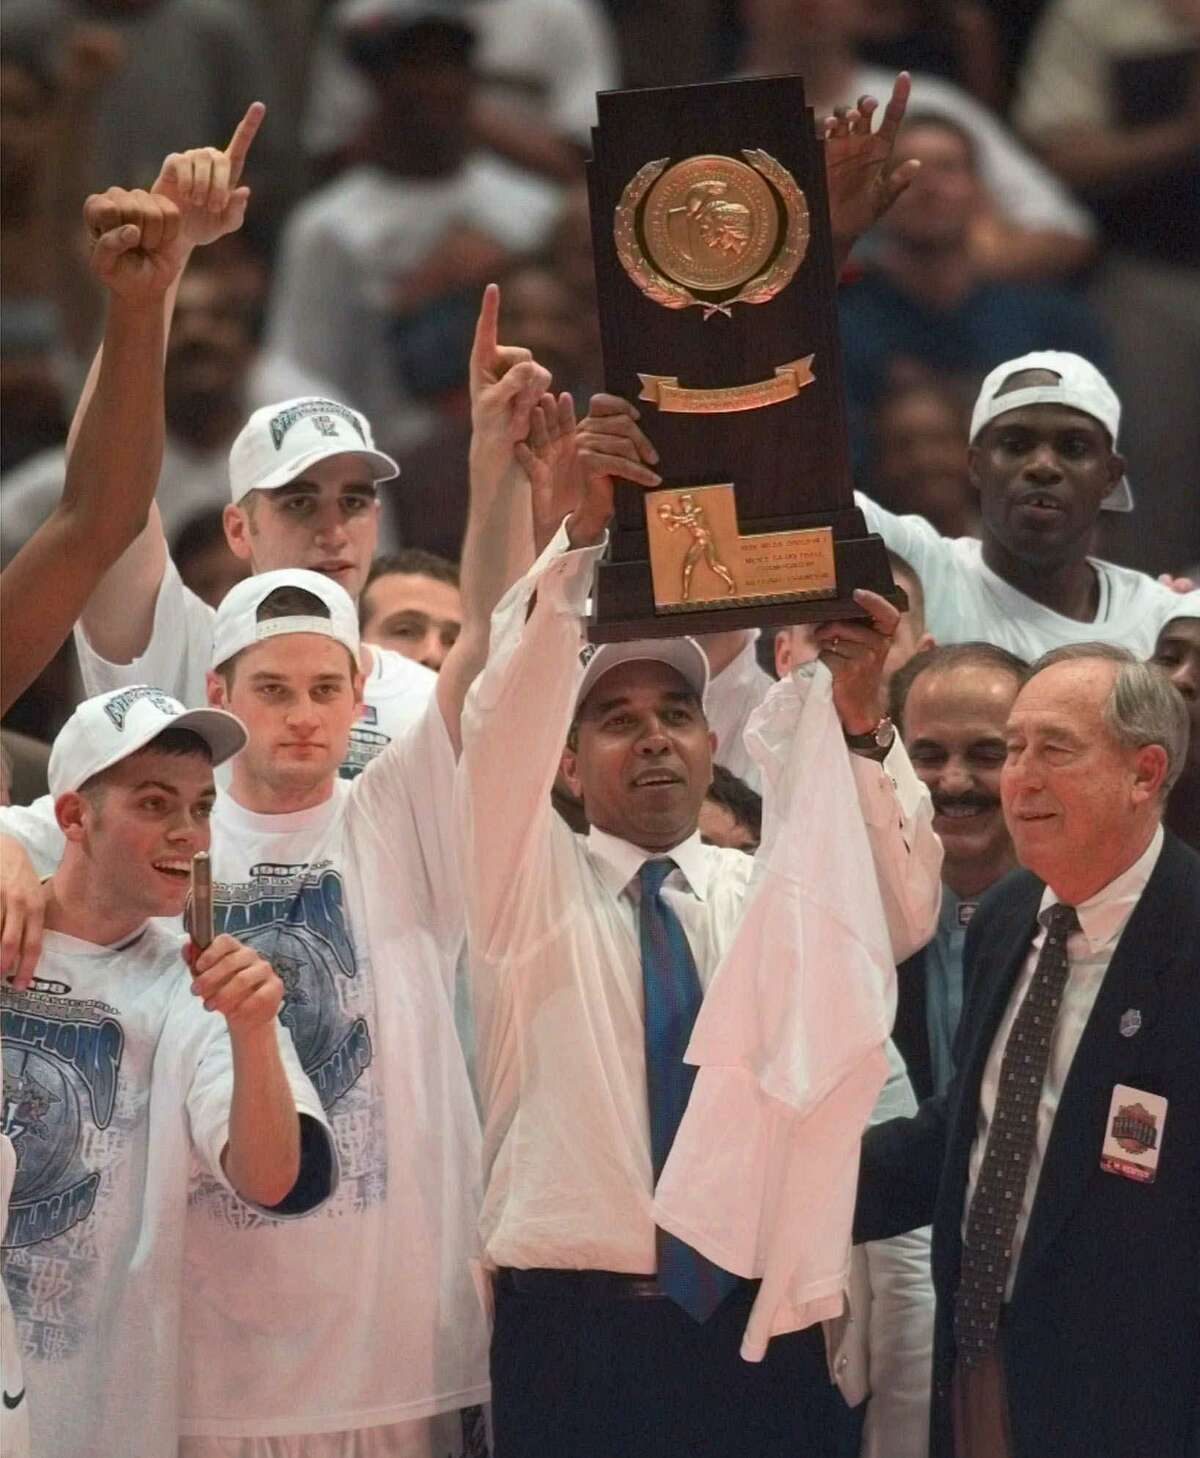 Kentucky coach Tubby Smith holds up the NCAA Div. I Championship trophy after the Wildcats 78-69 beat Utah in the NCAA Men's Final Four Championship game, Monday, March 30, 1998, at the Alamodome in San Antonio. At right is C.M. Newton, Kentucky atheletic director. (AP Photo/L.M. Otero)